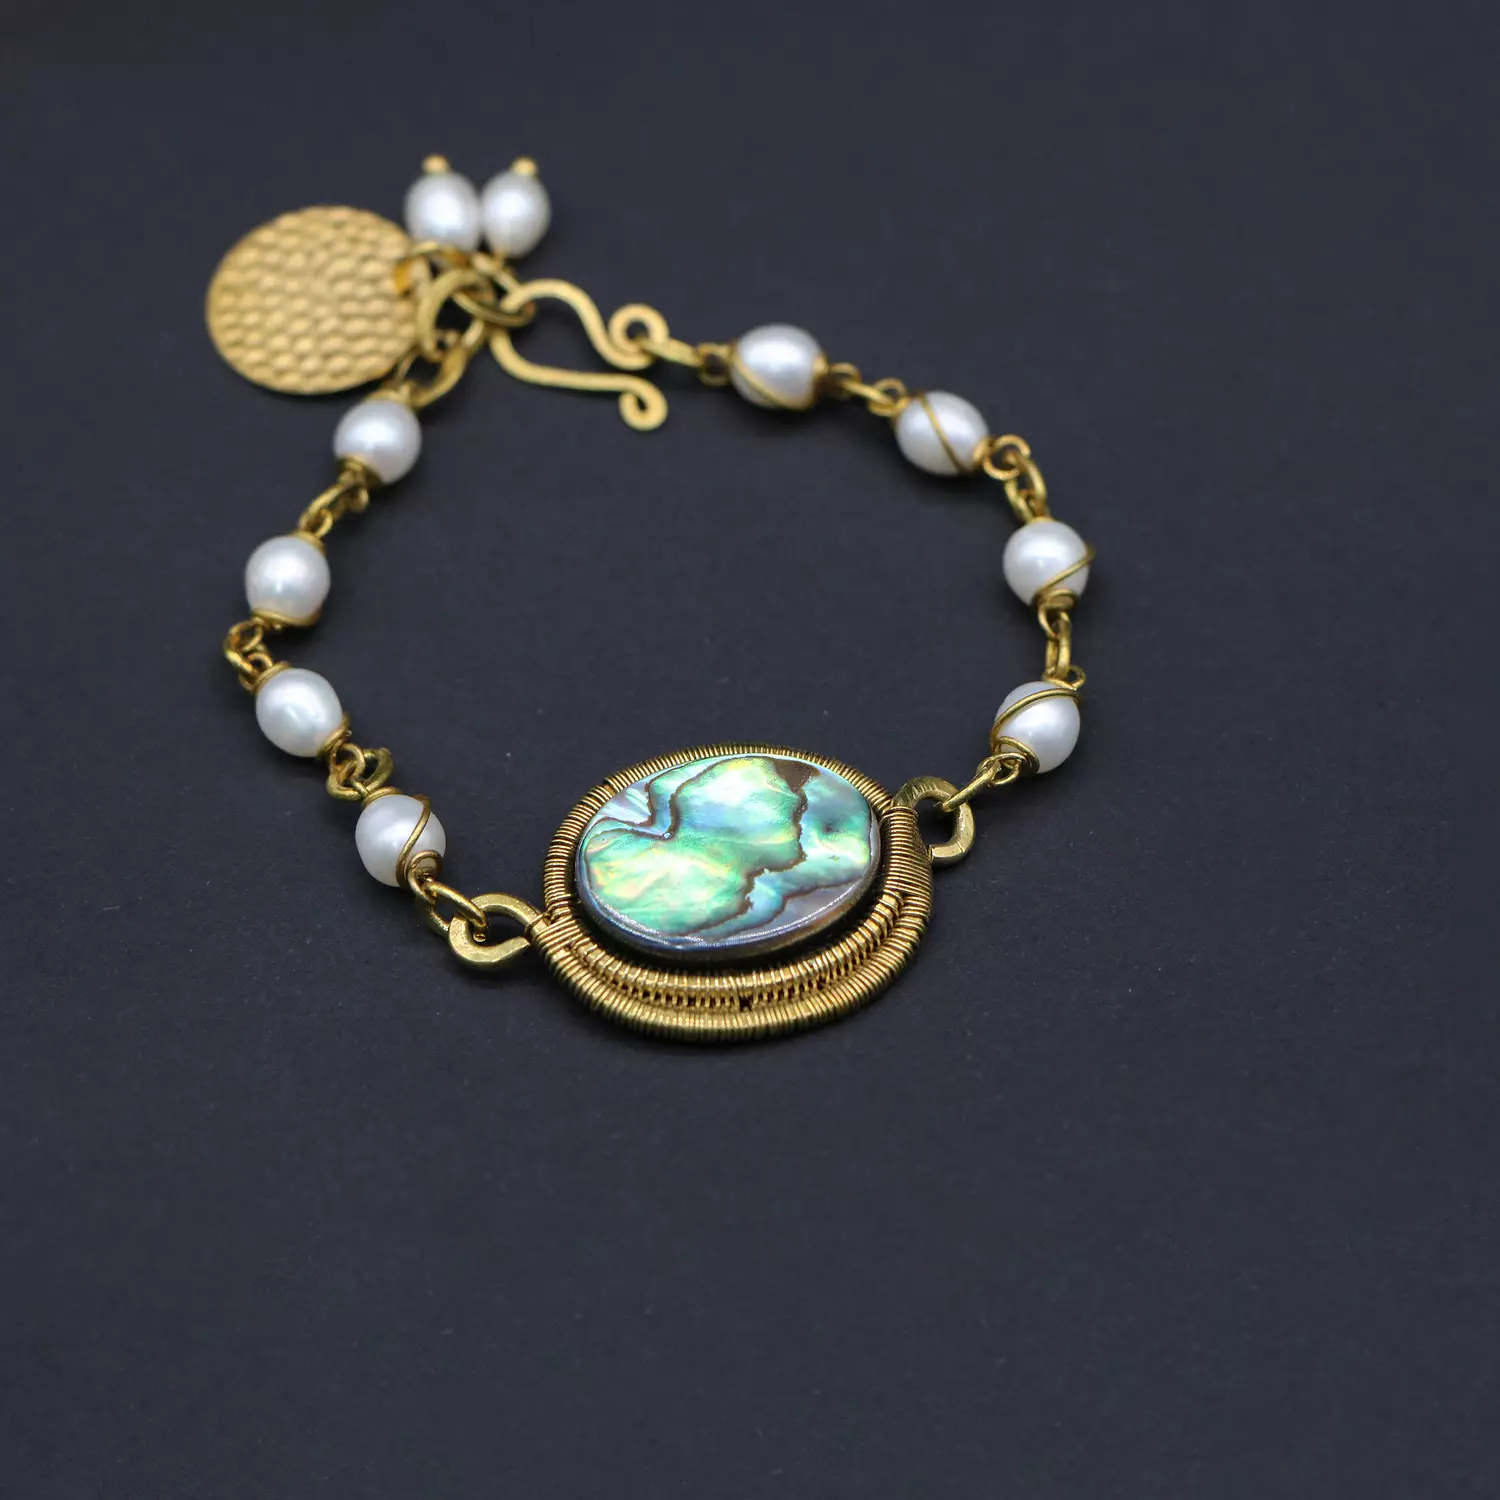 Brass bracelet with abalone shell and pearls. hover image